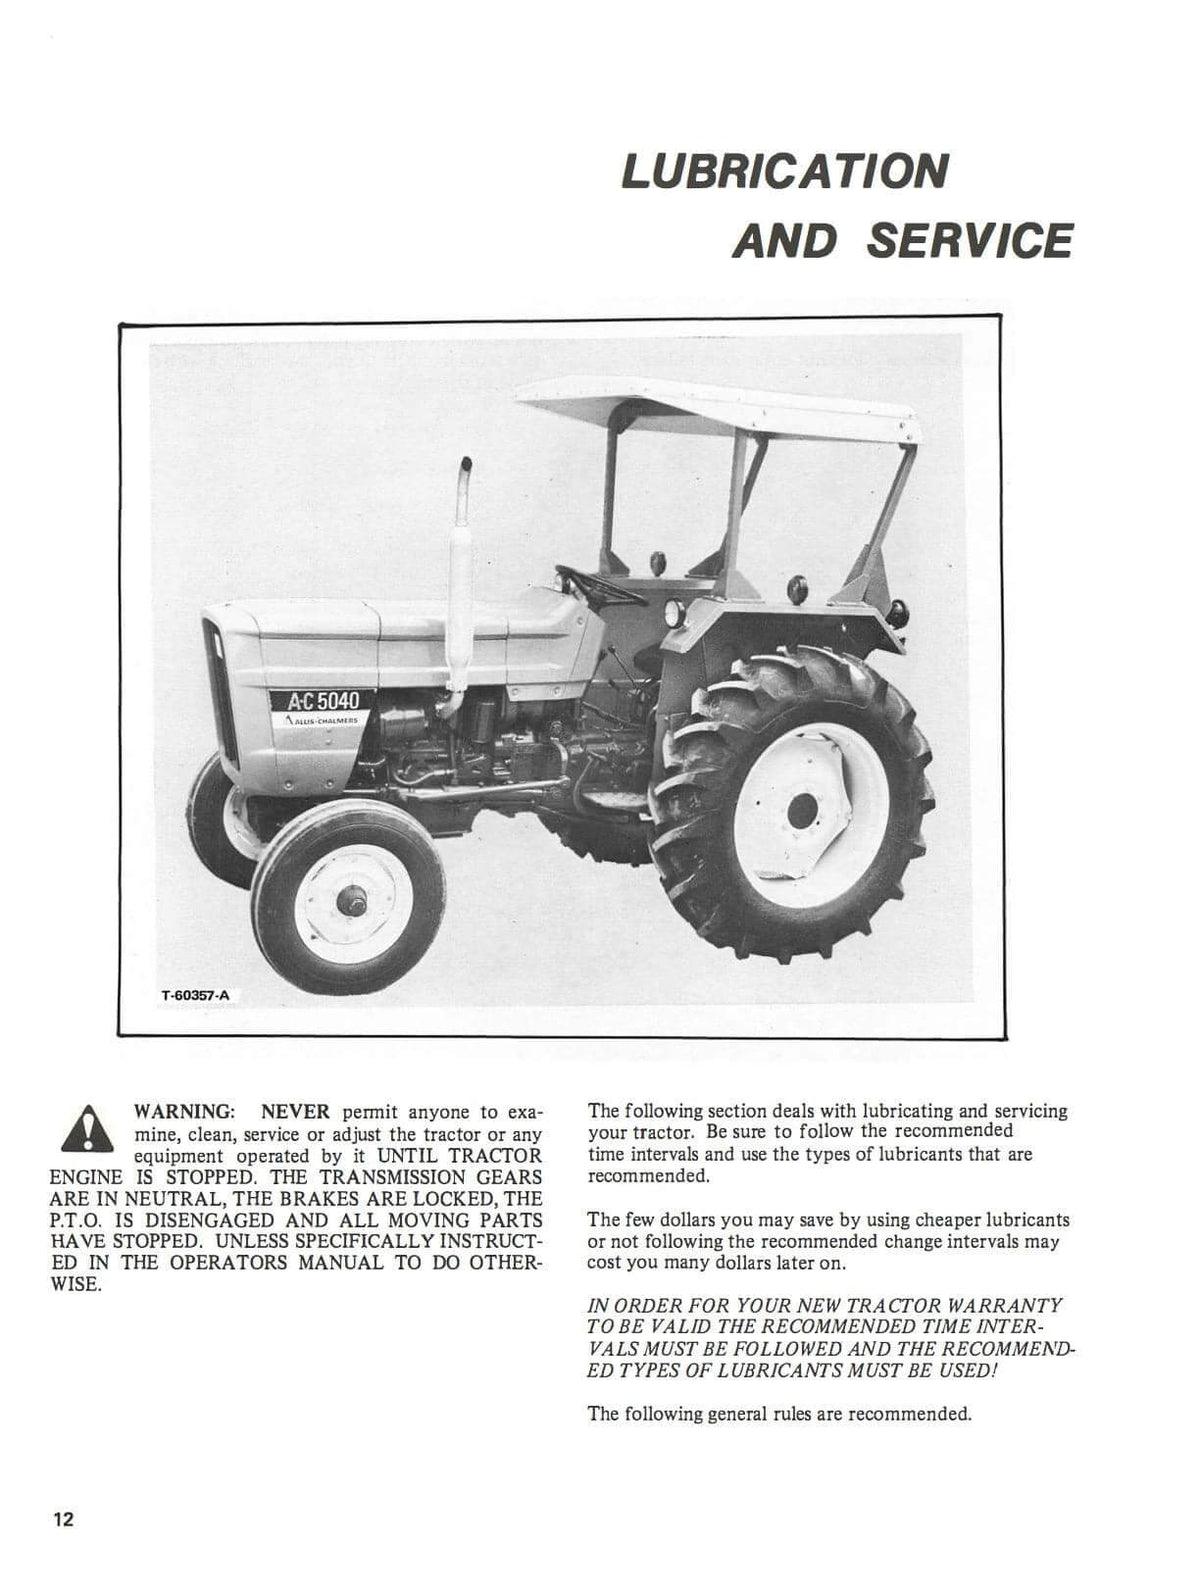 Allis-Chalmers 5040 Diesel Tractor - Operator's Manual - Ag Manuals - A Provider of Digital Farm Manuals - 2